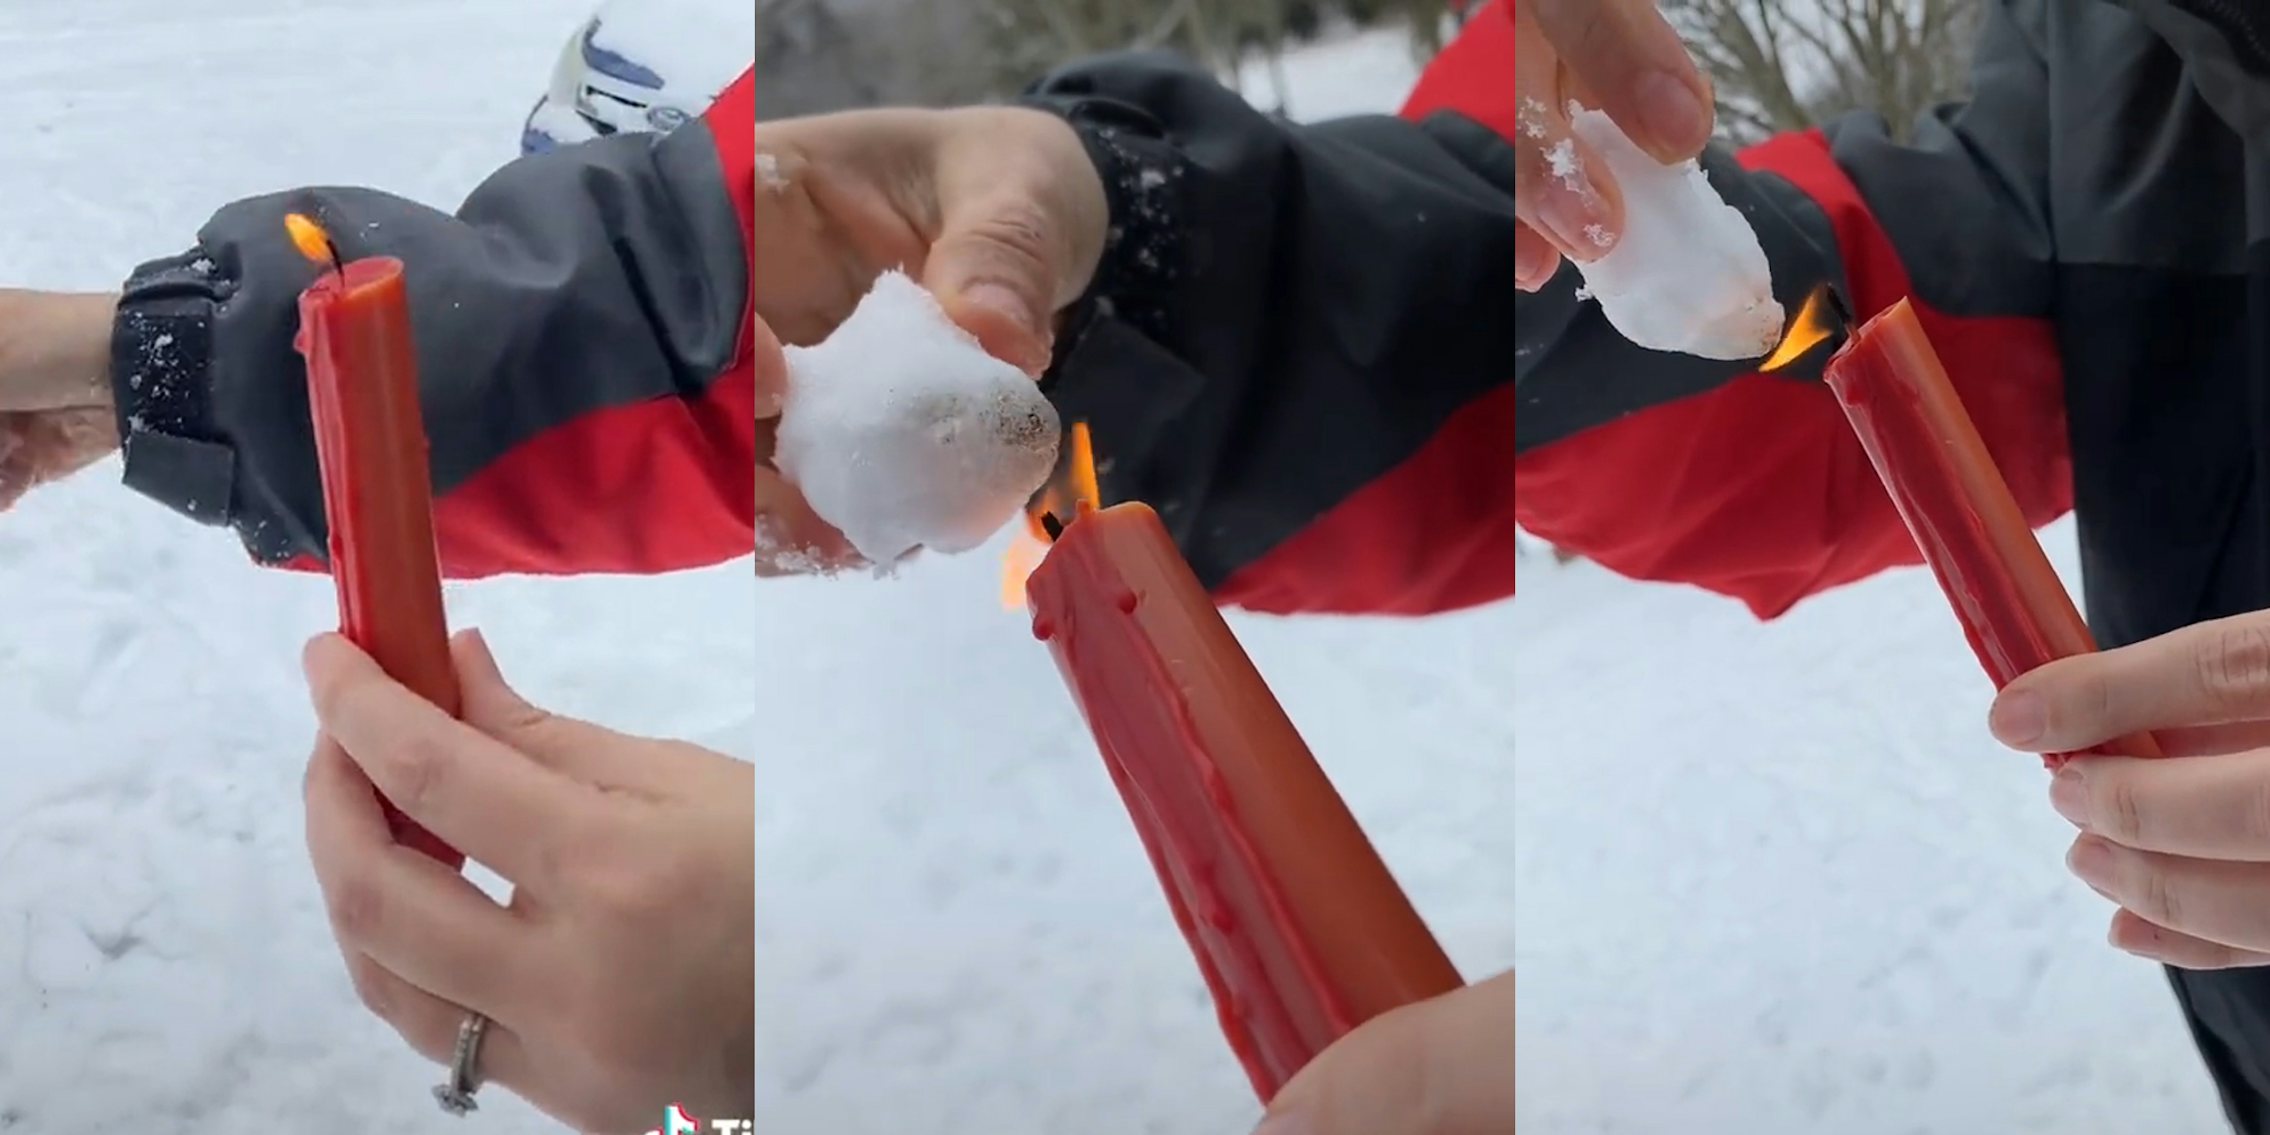 woman trying to melt a snowball with a candle